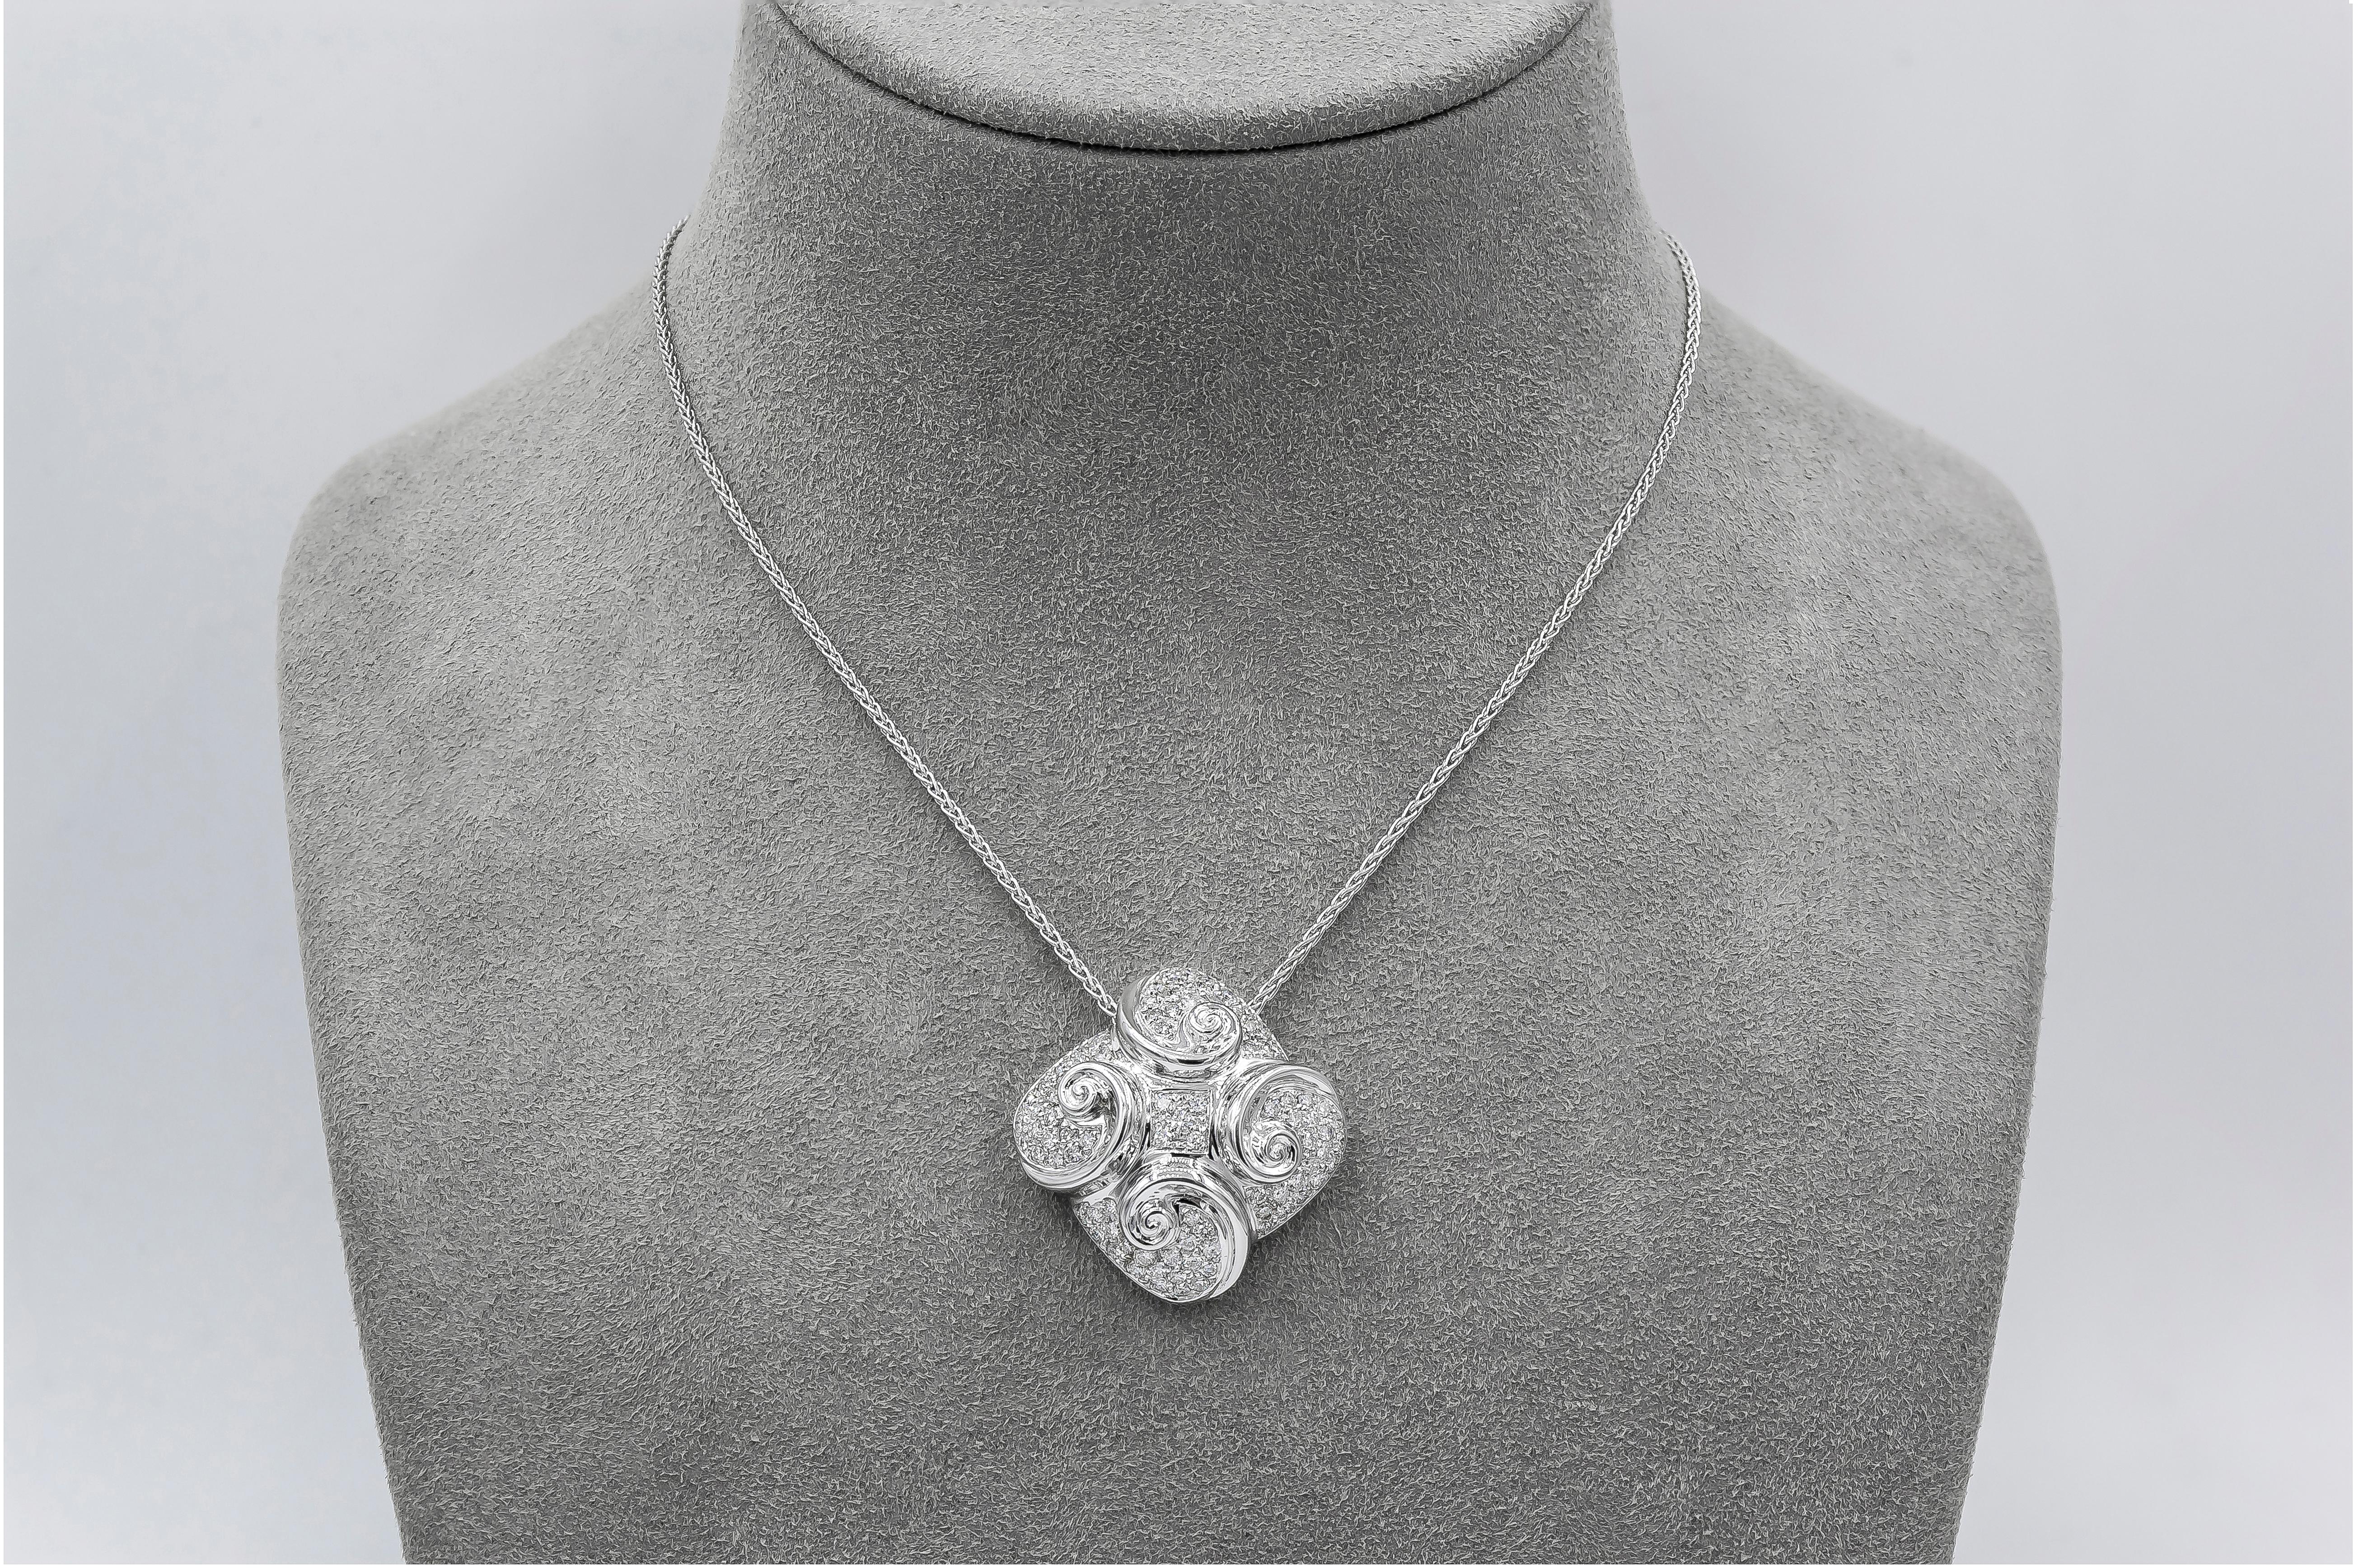 This chic pendant necklace showcasing a fashionable swirl design encrusted with round brilliant diamonds weighing 1.34 carats total. Made in 18 karat white gold. Suspended on an 18 inch white gold chai. 
(adjustable upon request).

Roman Malakov is